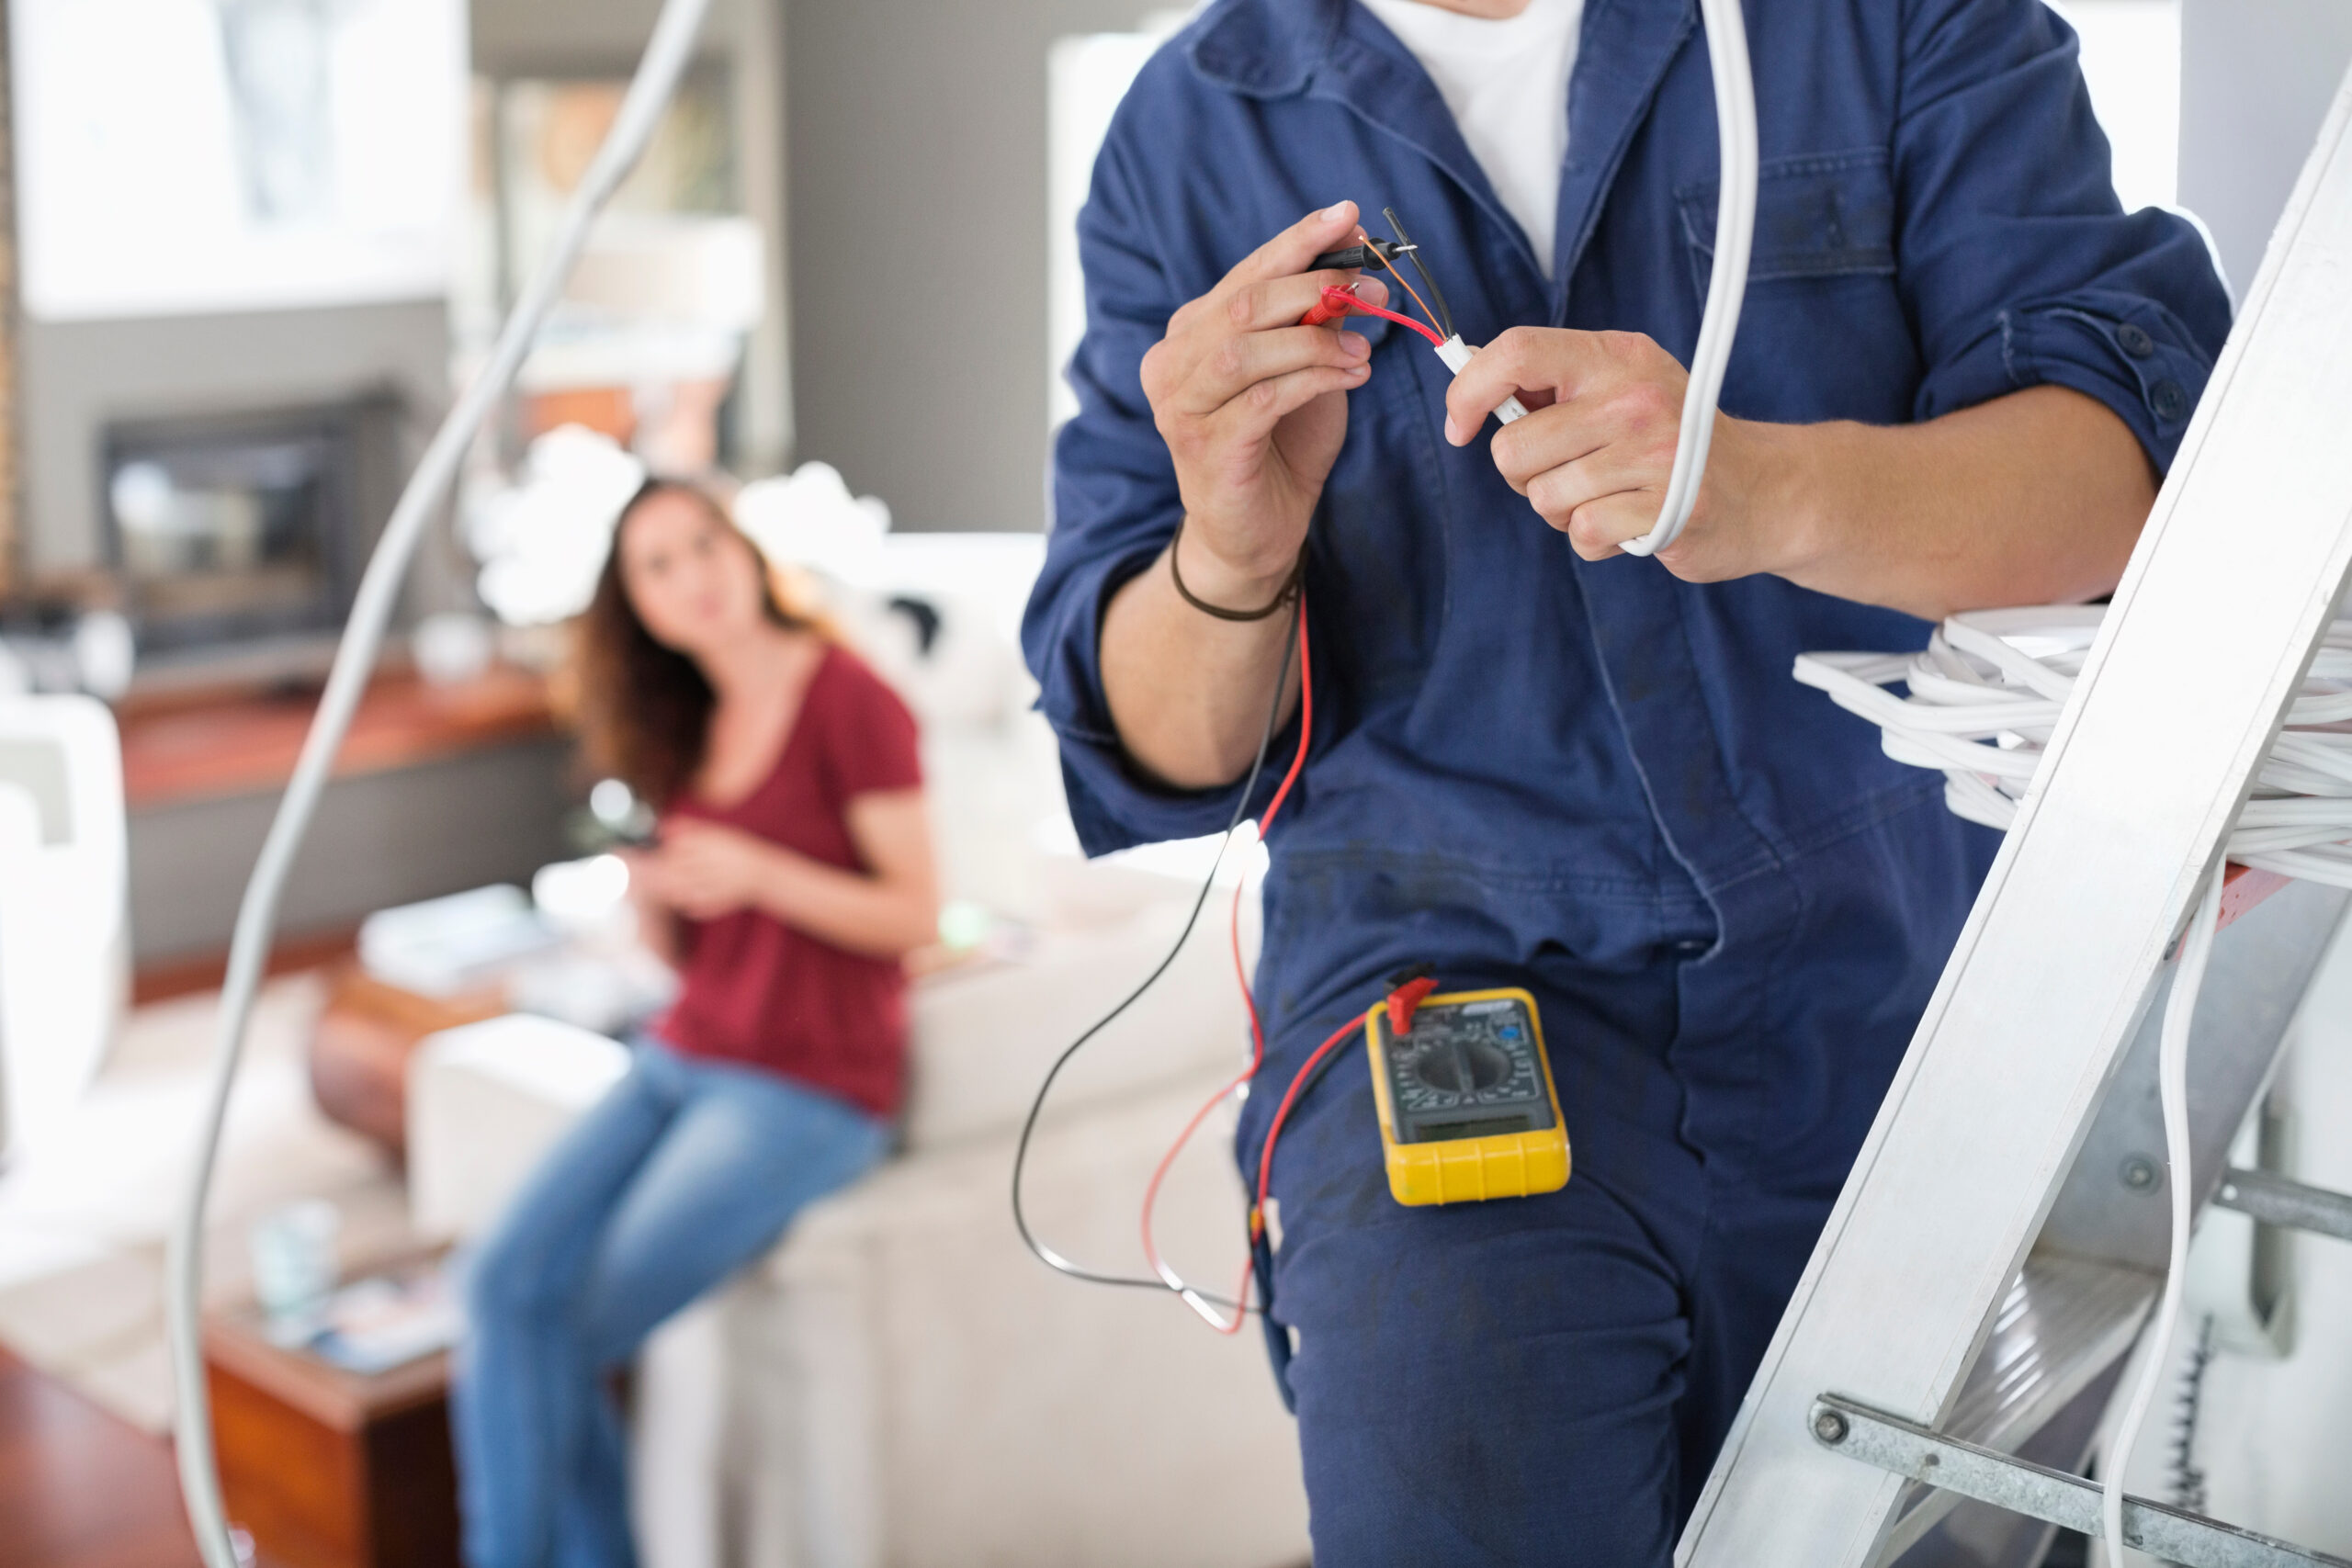 This is a picture for a blog about JMC Electric's residential home electricians for your next project.